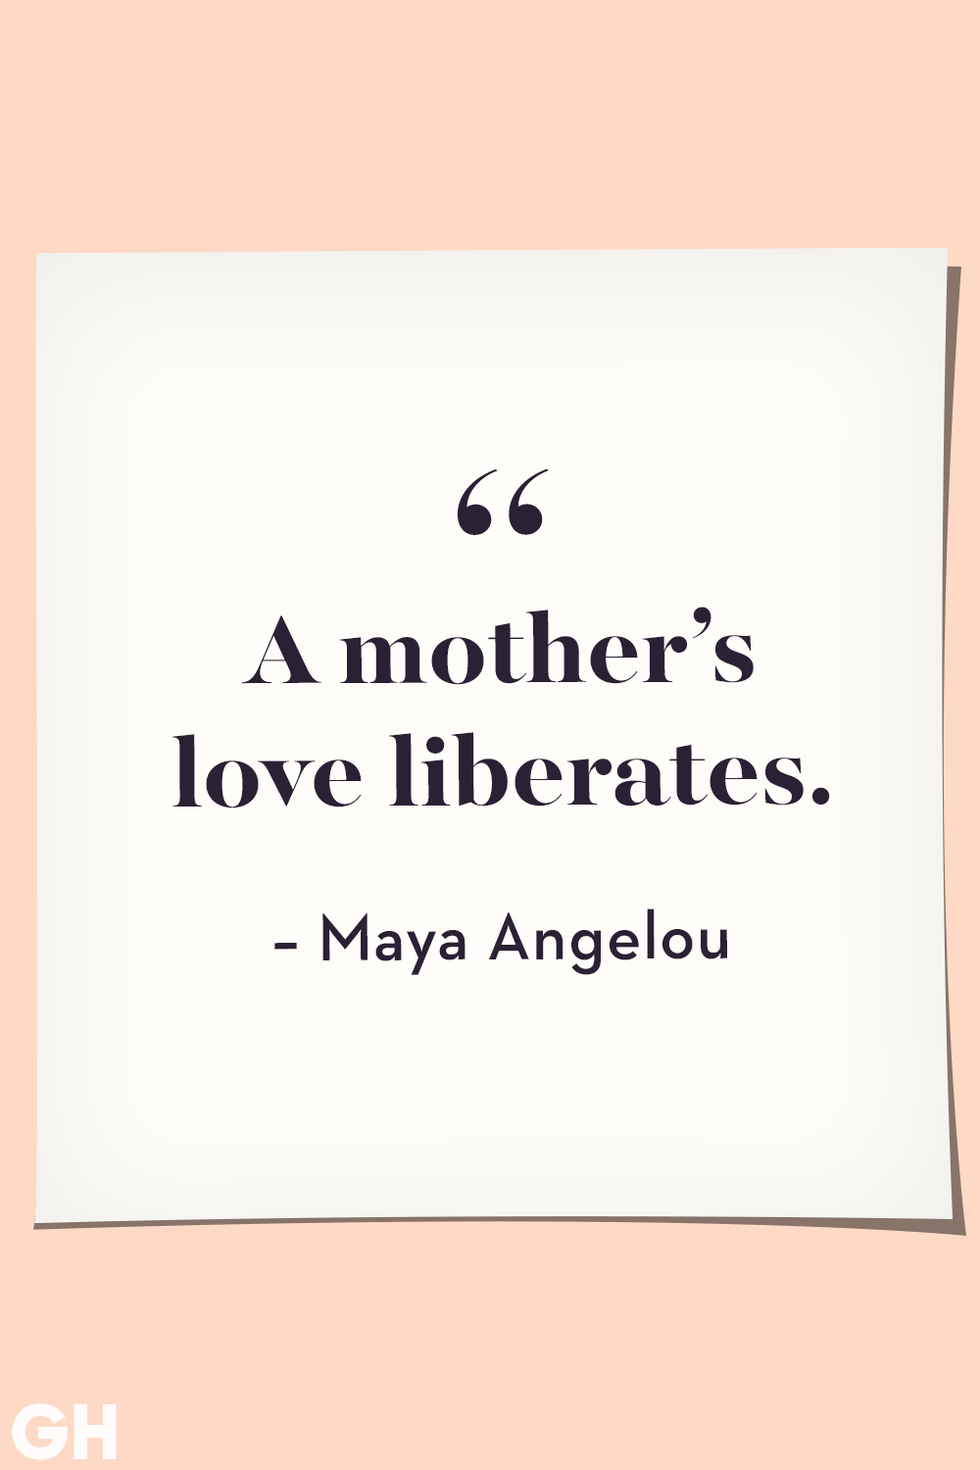 68 Best Mother's Day Card Messages for All the Moms in Your Life